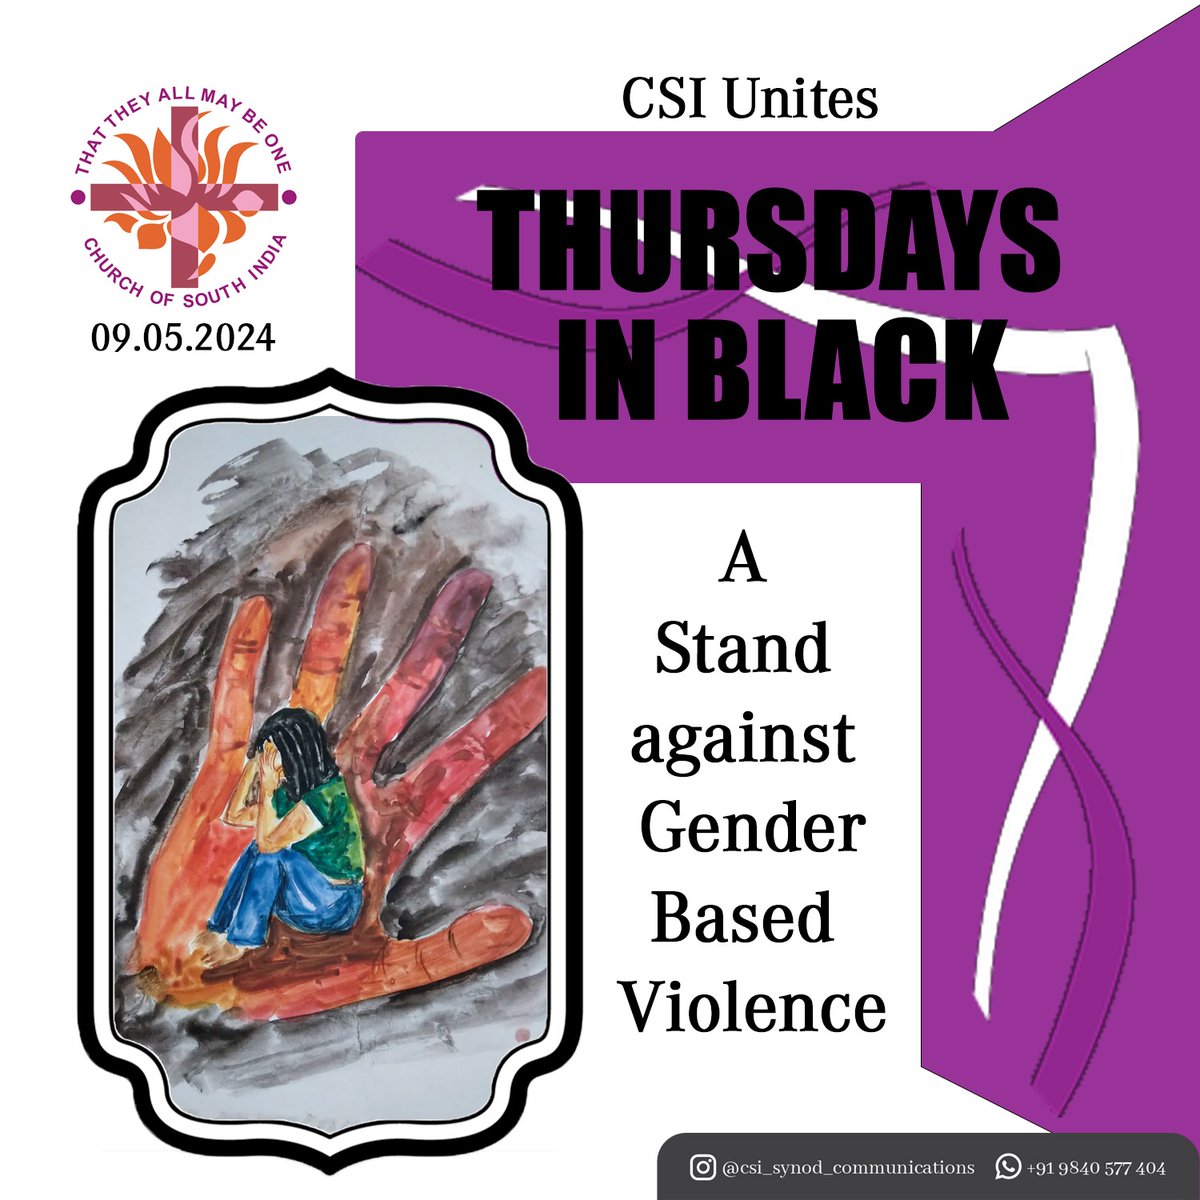 #CSI #thursdaysinblack @ThursdayInBlack @Oikoumene #againstGBV

The Church of South India (CSI) stands united in the Thursdays in Black campaign, taking a firm stand against gender-based violence.